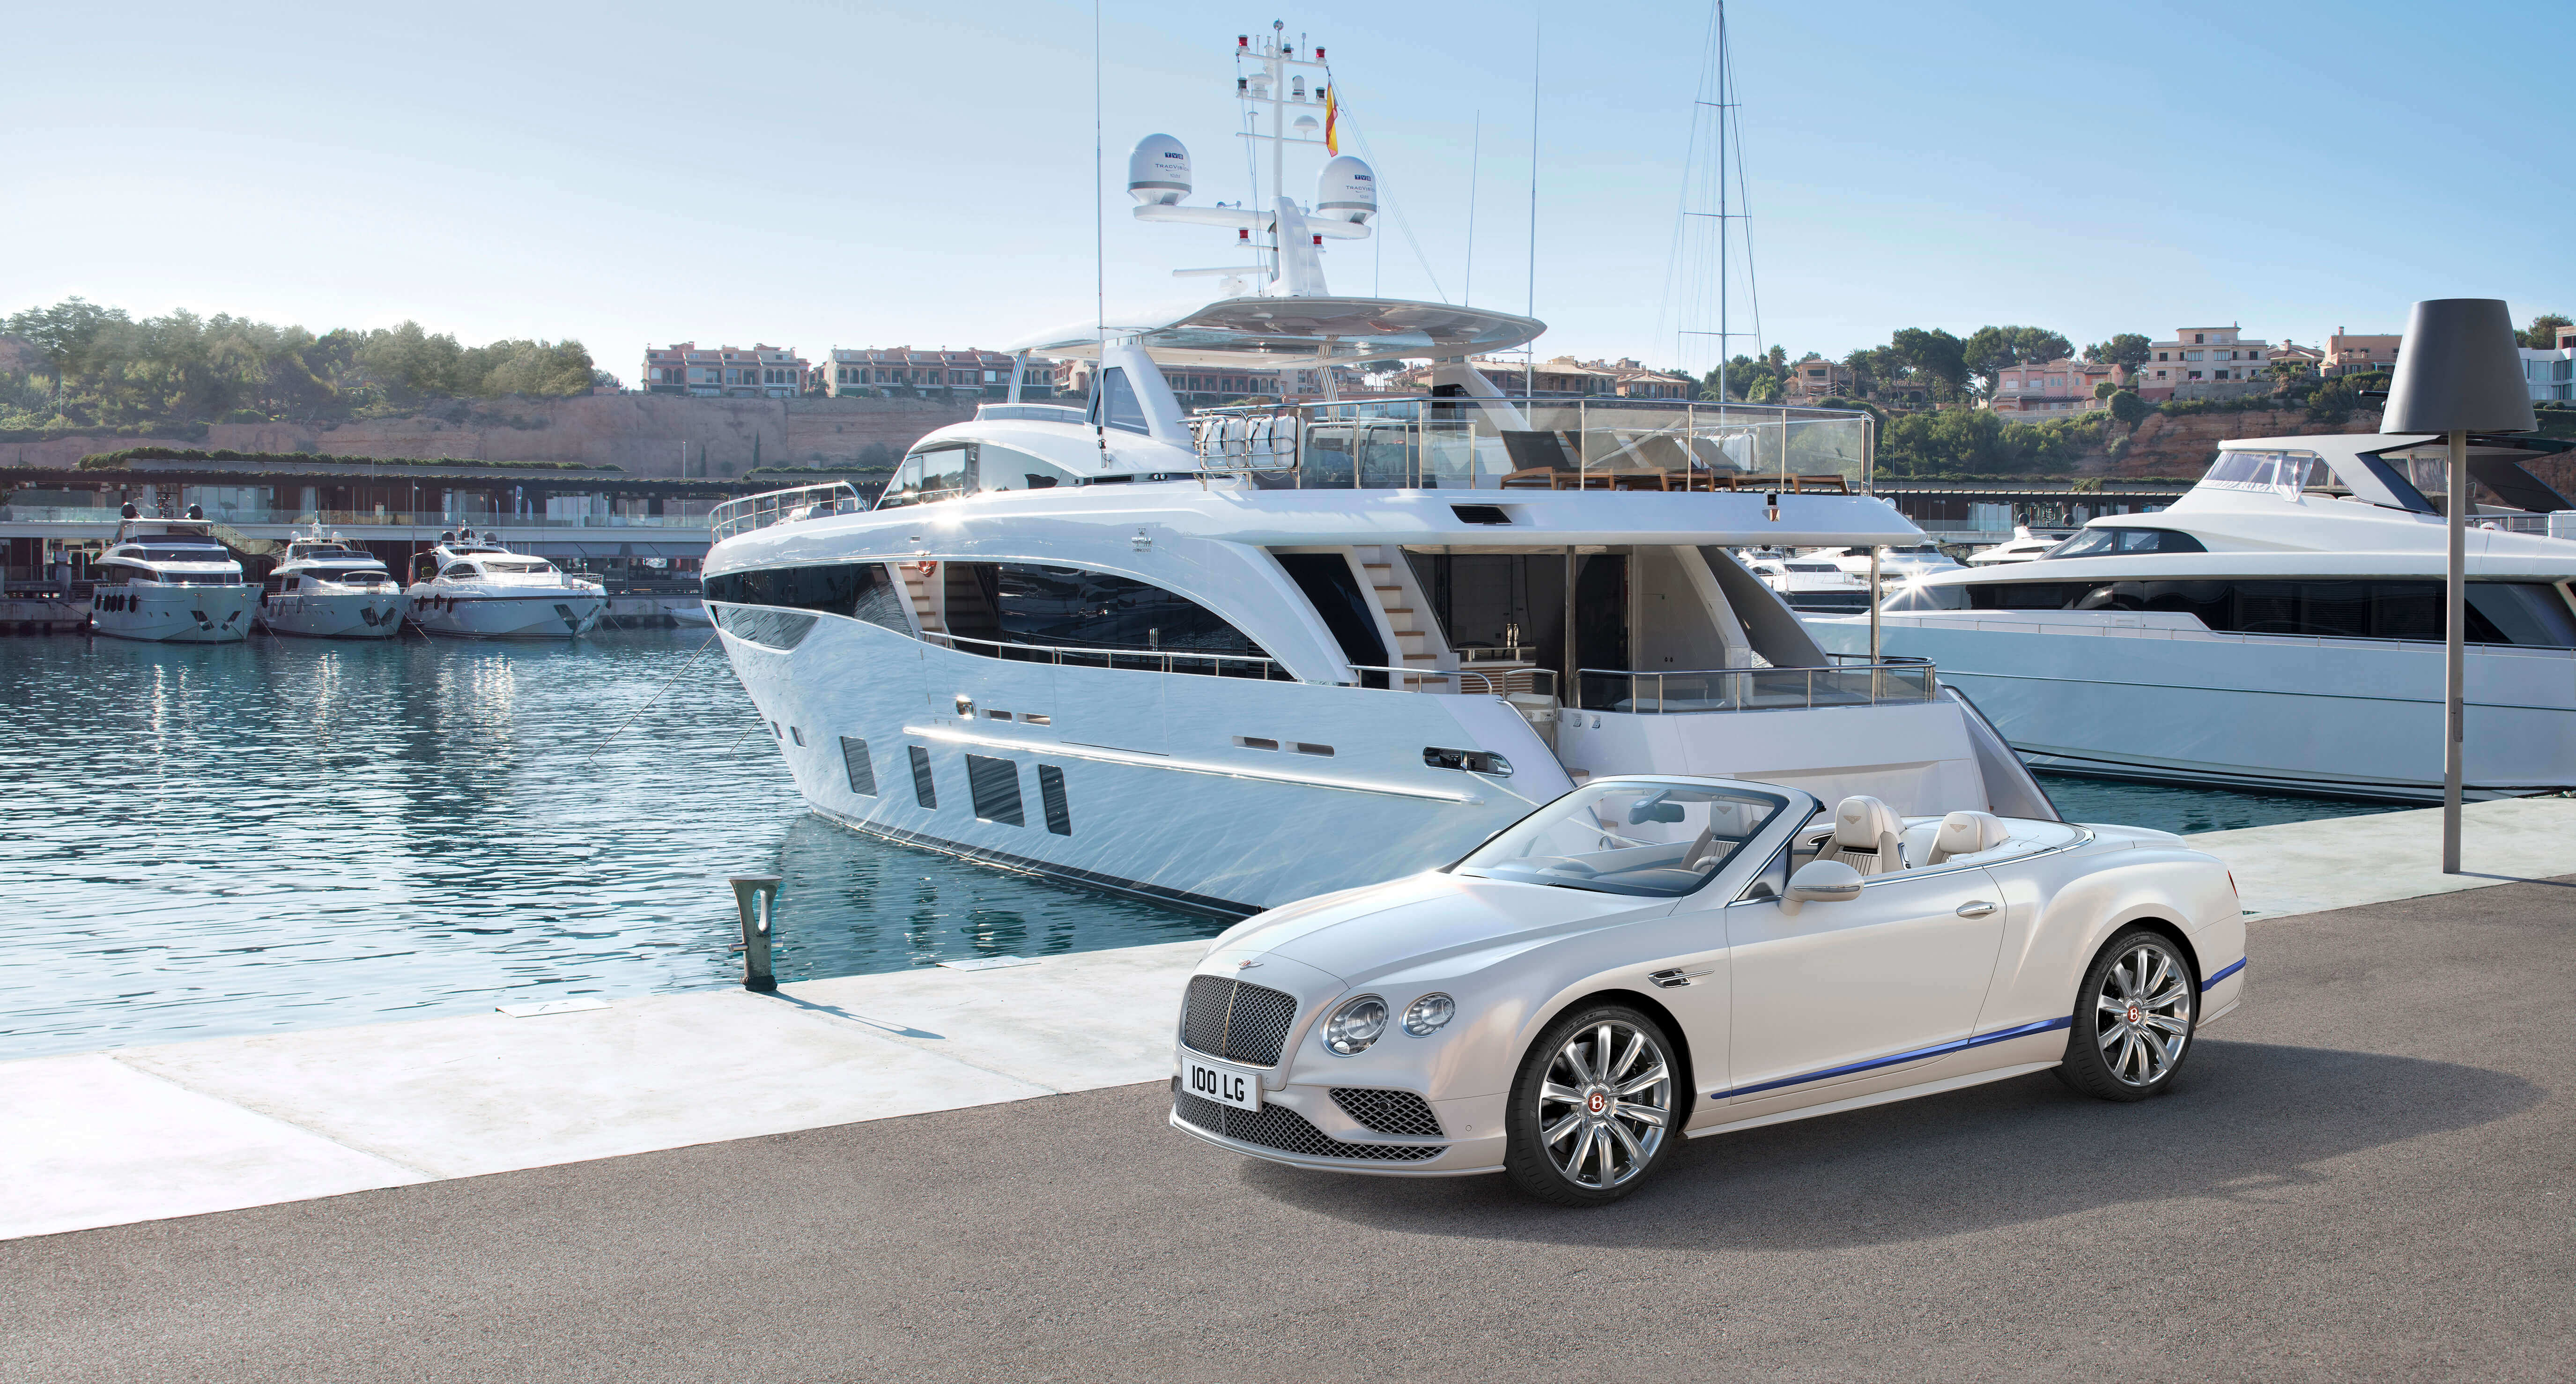 Galene Edition By Mulliner: Inspired By The Finest Luxury Yachts